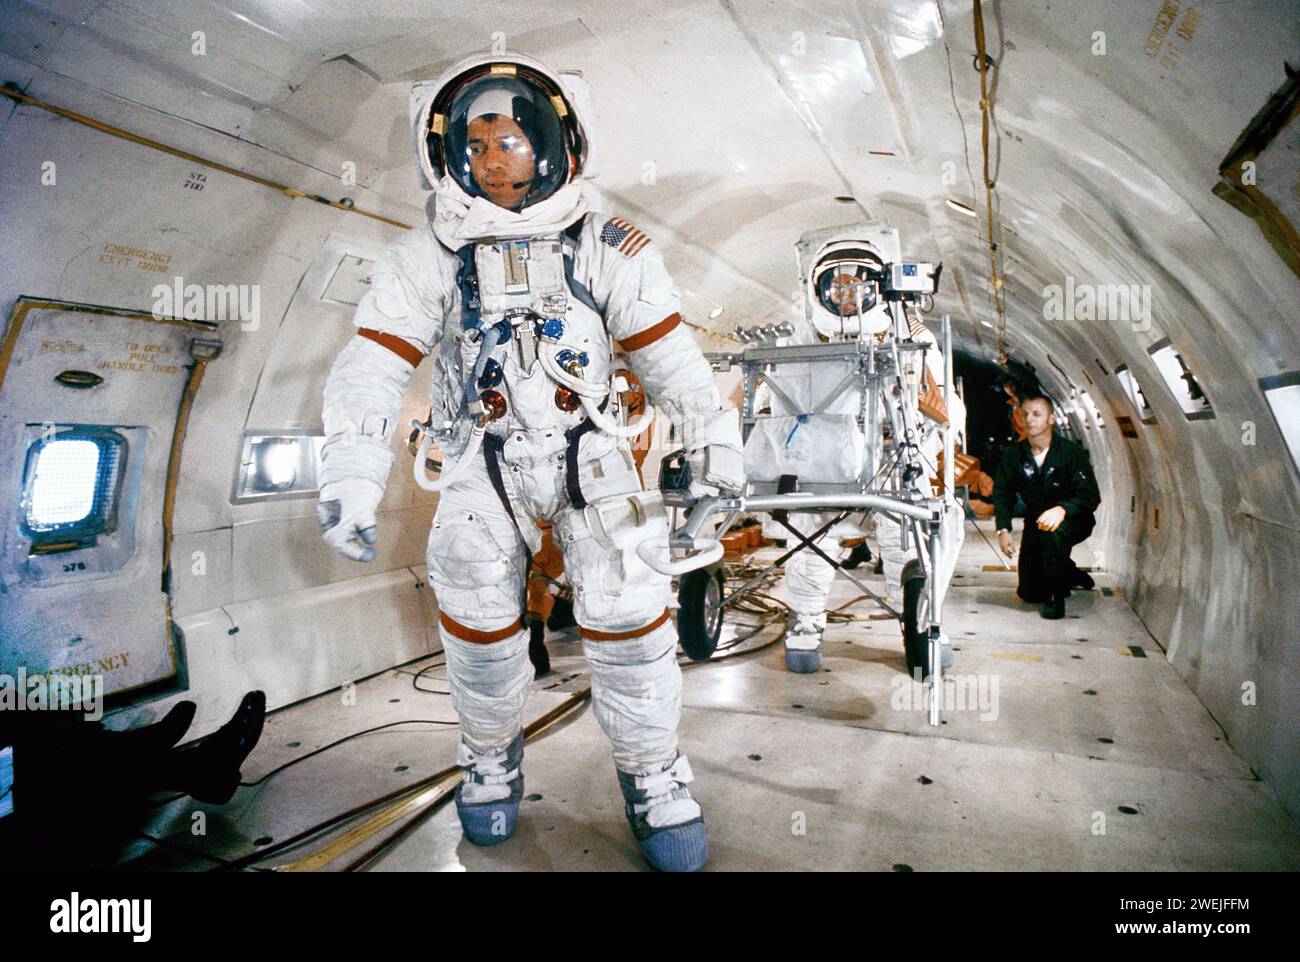 Astronaut Alan B. Shepard Jr., Apollo 14 commander, pulling modular equipment transporter under weightless conditions during training exercise aboard Air Force KC-135, with Astronaut Edgar D. Mitchell, lunar module pilot, in background, Patrick Air Force Base,  Brevard County, Florida, USA, NASA, November 4, 1970 Stock Photo